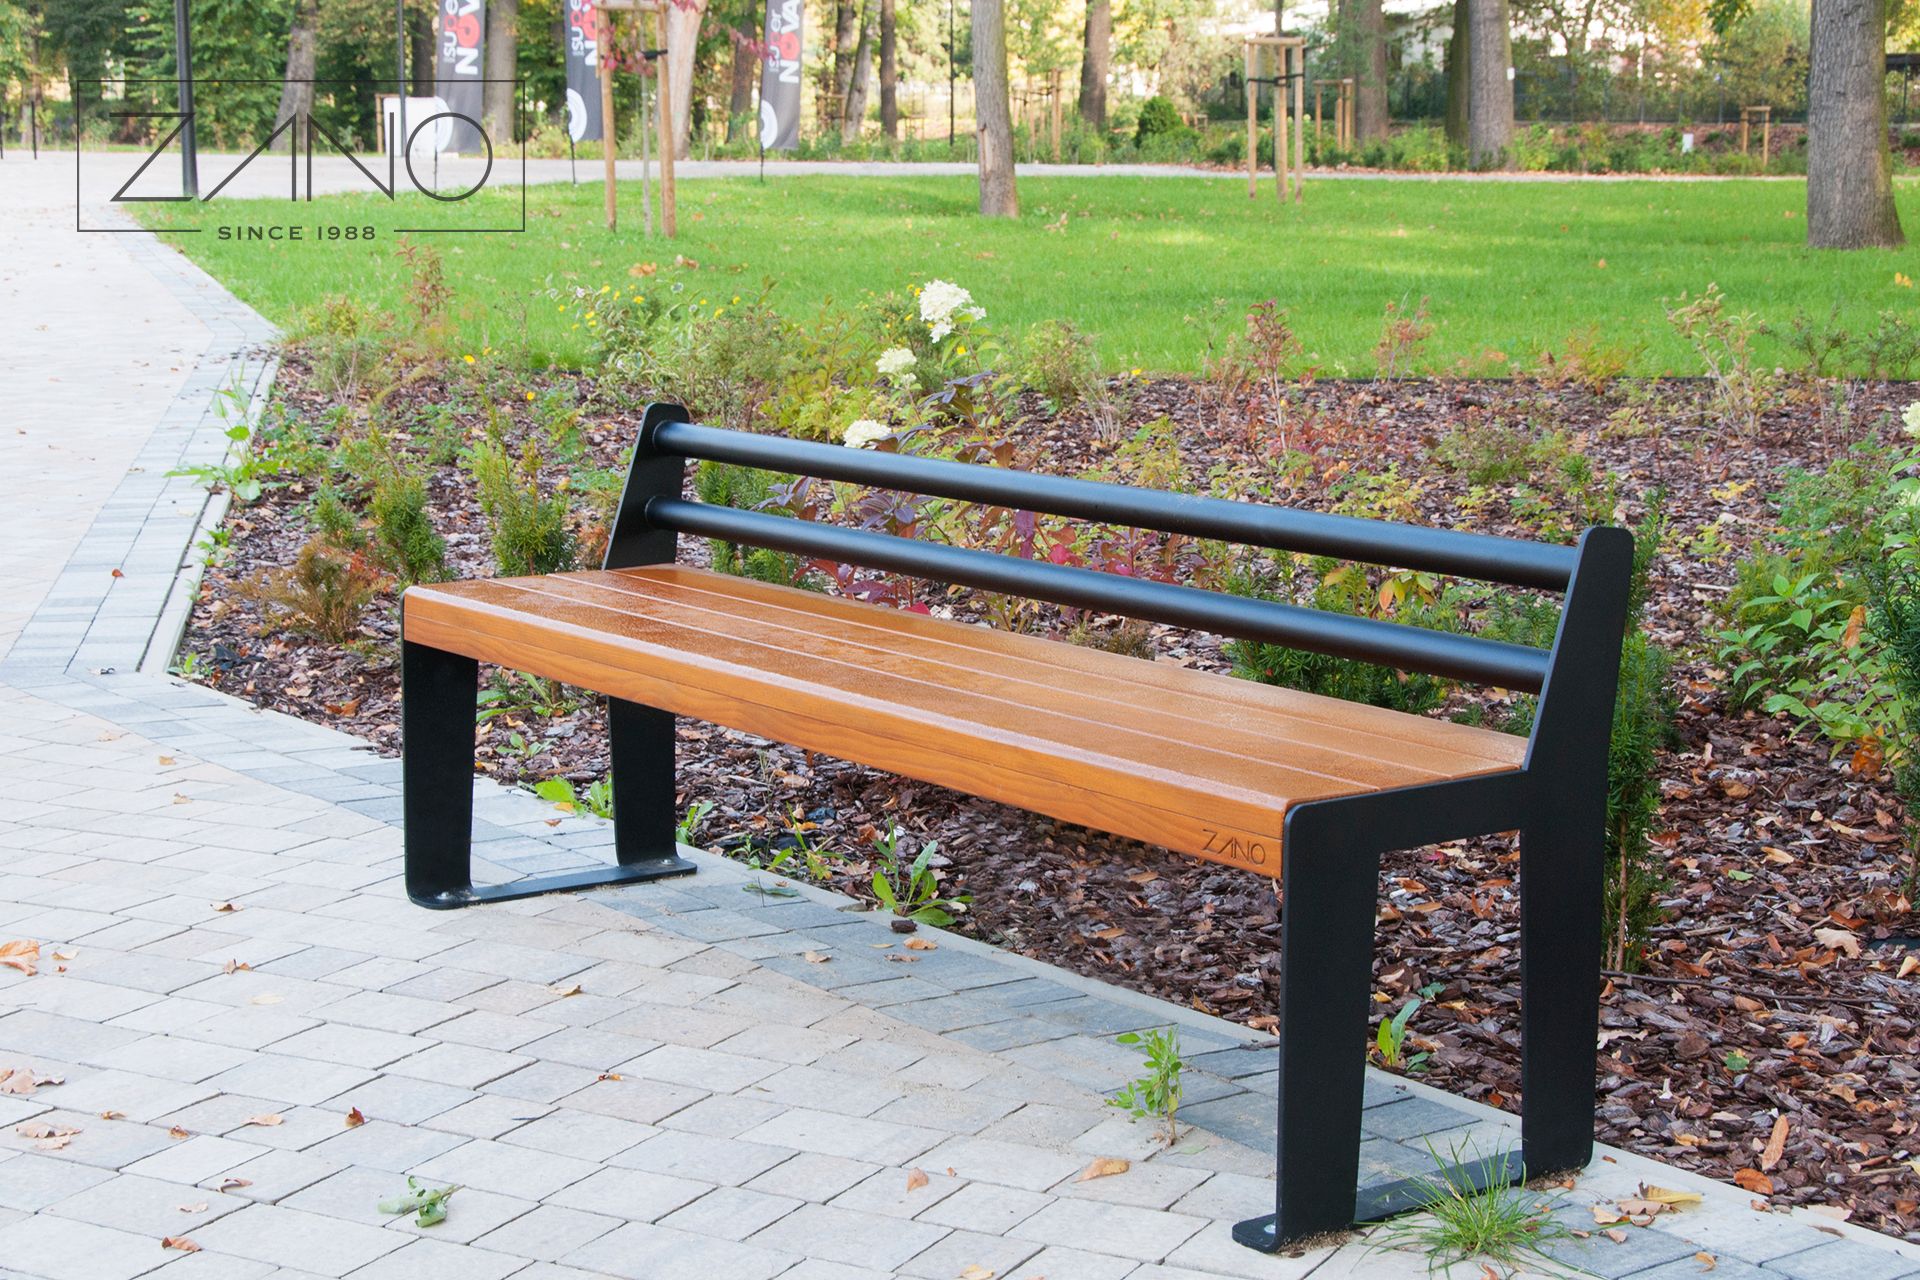 Park benches mady by ZANO Street Furniture